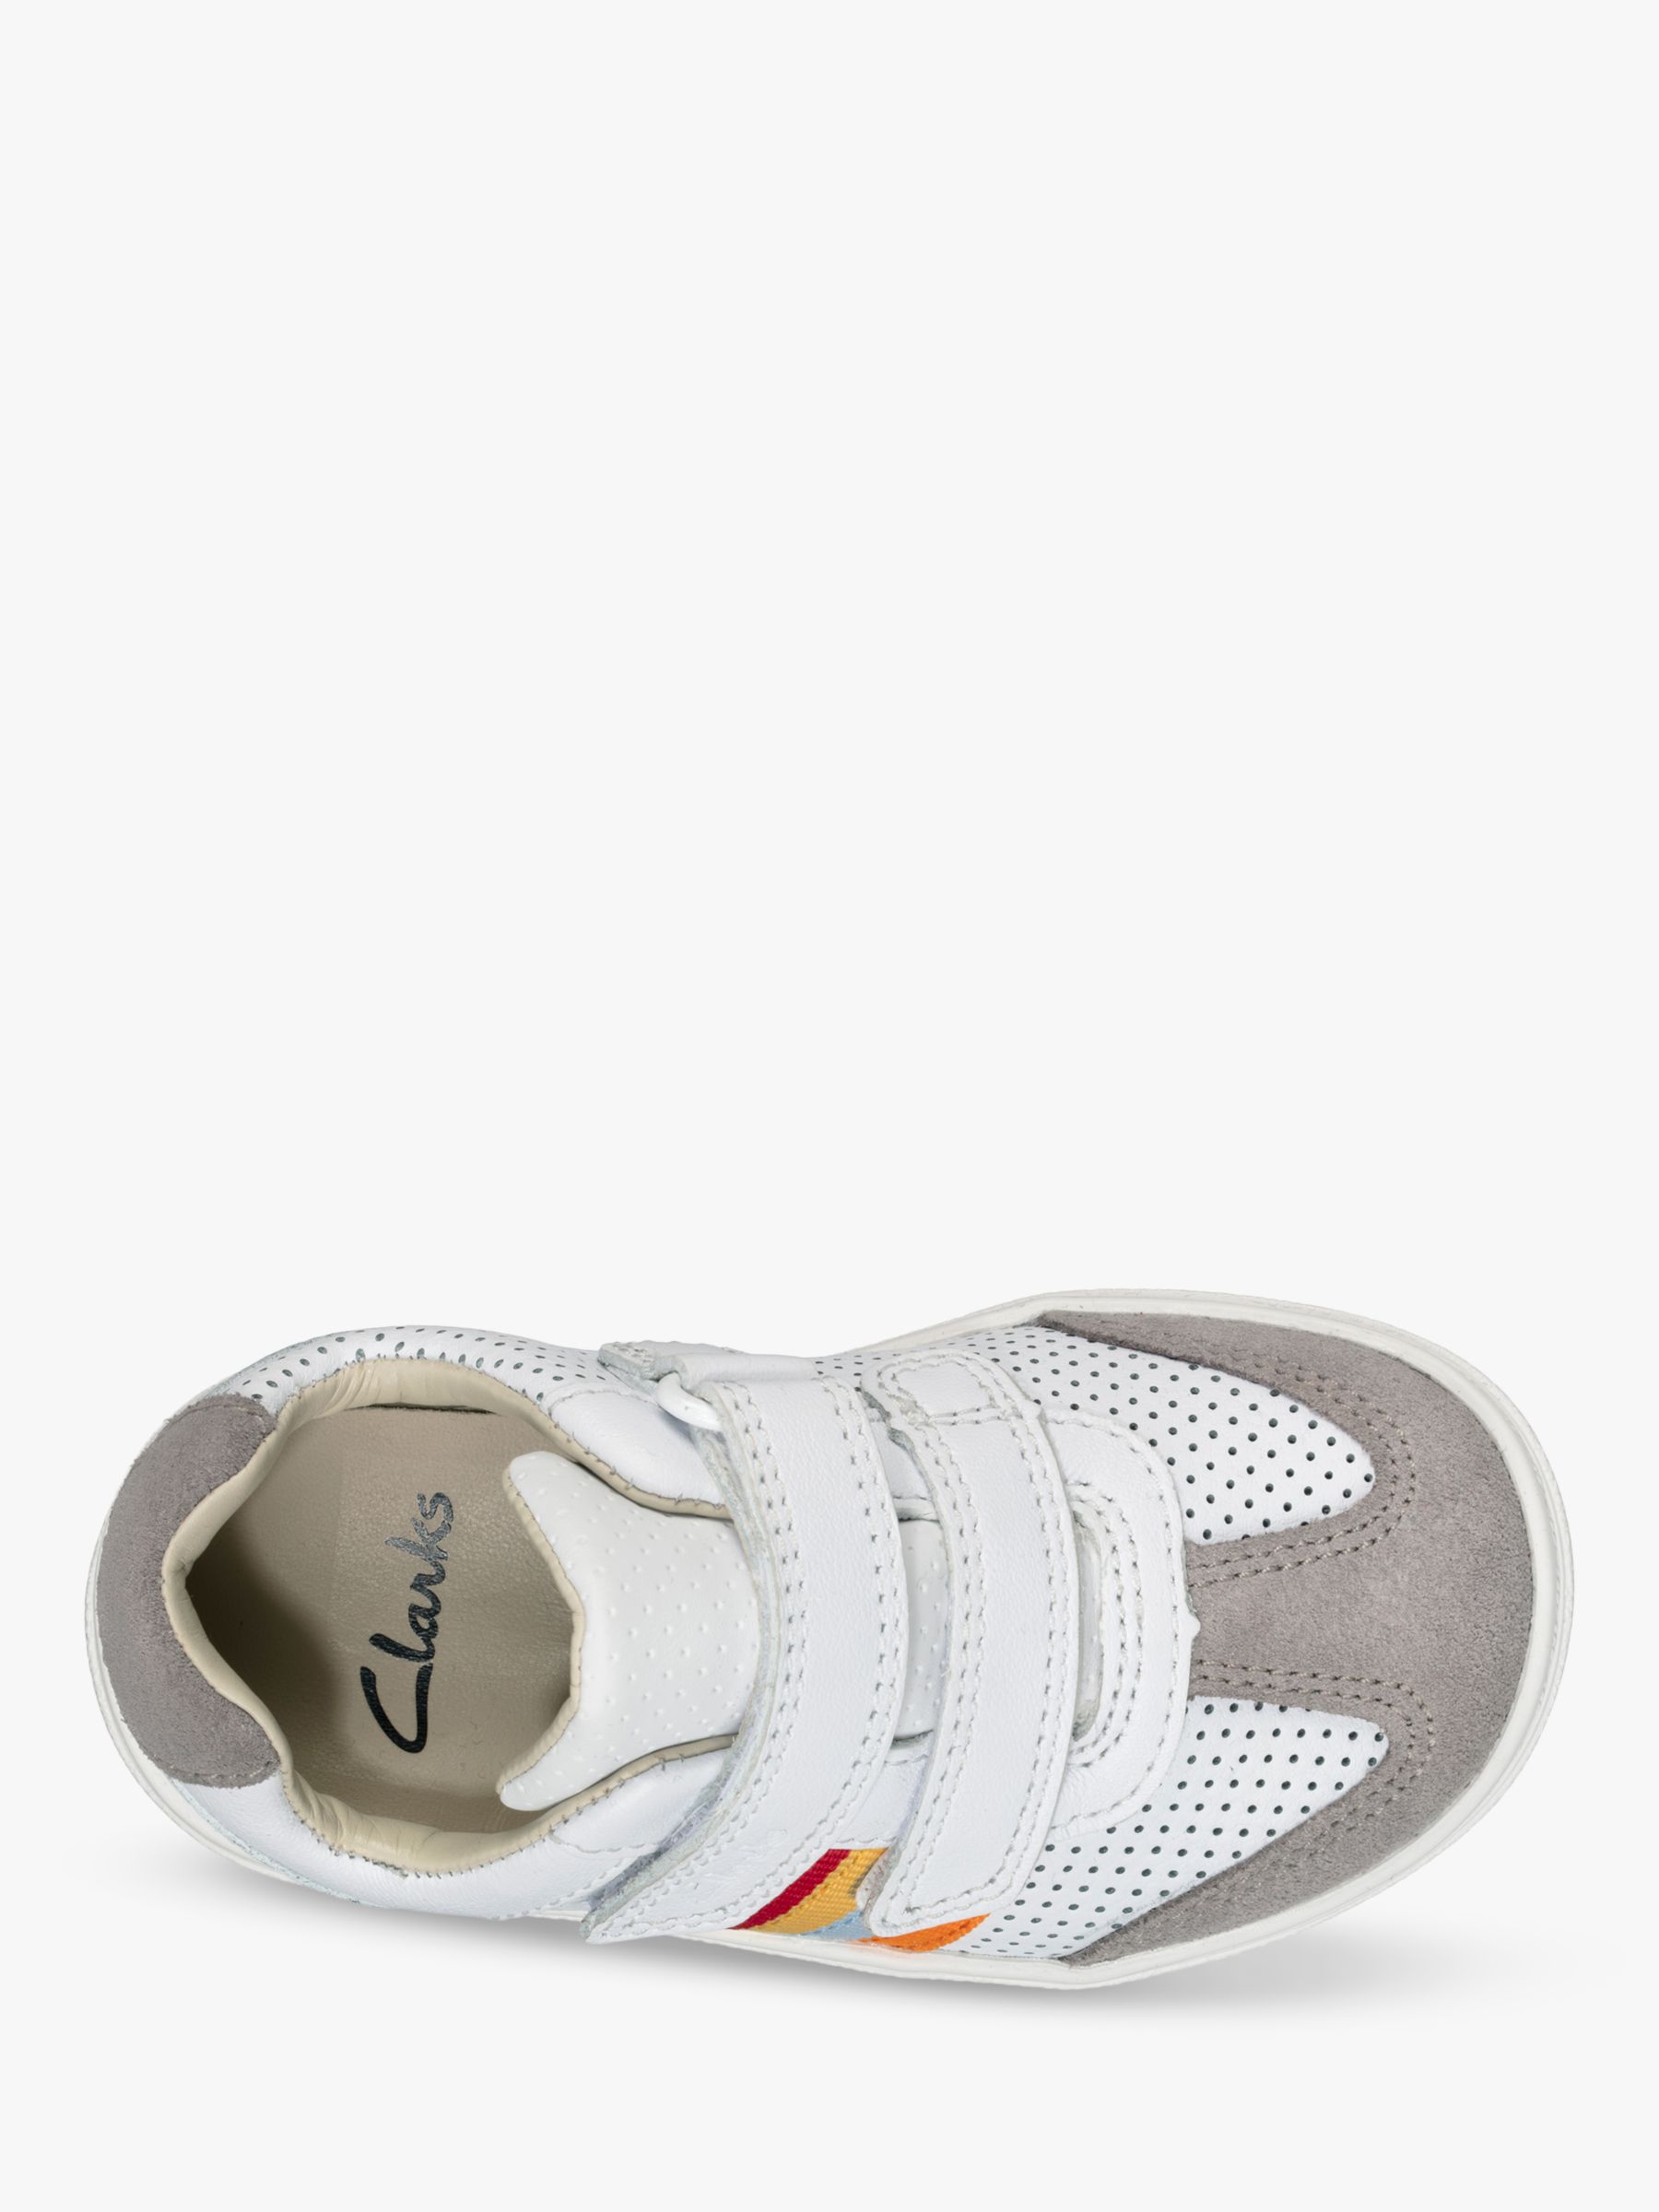 clarks childrens white trainers